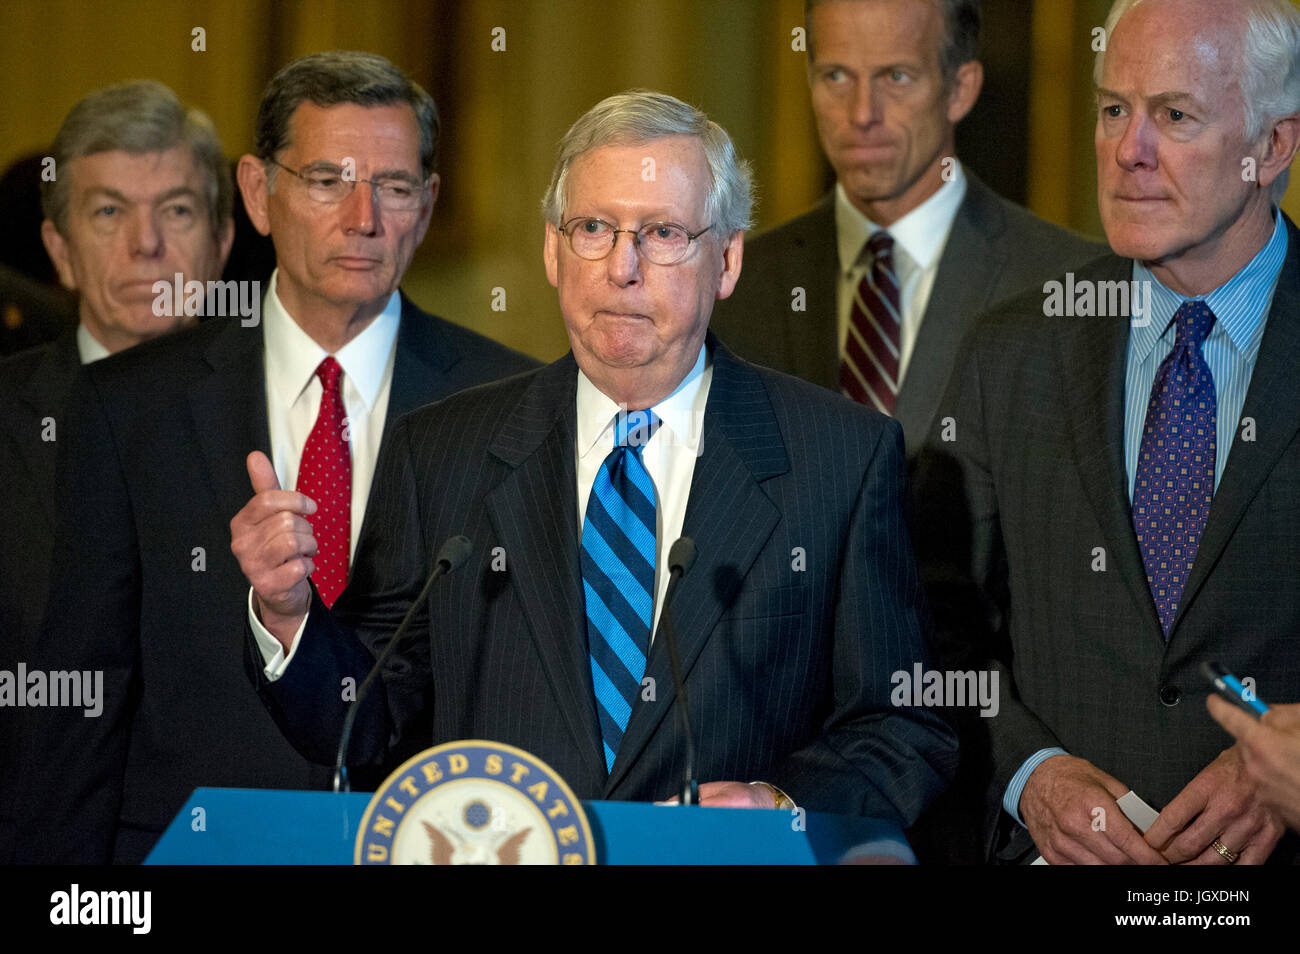 United States Senate Majority Leader Mitch McConnell (Republican of Kentucky), center, speaks to reporters following the Republican Party luncheon in the United States Capitol in Washington, DC on Tuesday, July 11, 2017. From left to right: US Senator Roy Blunt (Republican of Missouri), US Senator John Barrasso (Republican of Wyoming), Leader McConnell, US Senator John Thune (Republican of South Dakota) and US Senator John Cornyn (Republican of Texas). In his remarks, McConnell announced he will keep the Senate in session for the first two weeks of August, delaying their summer recess. Credit: Stock Photo